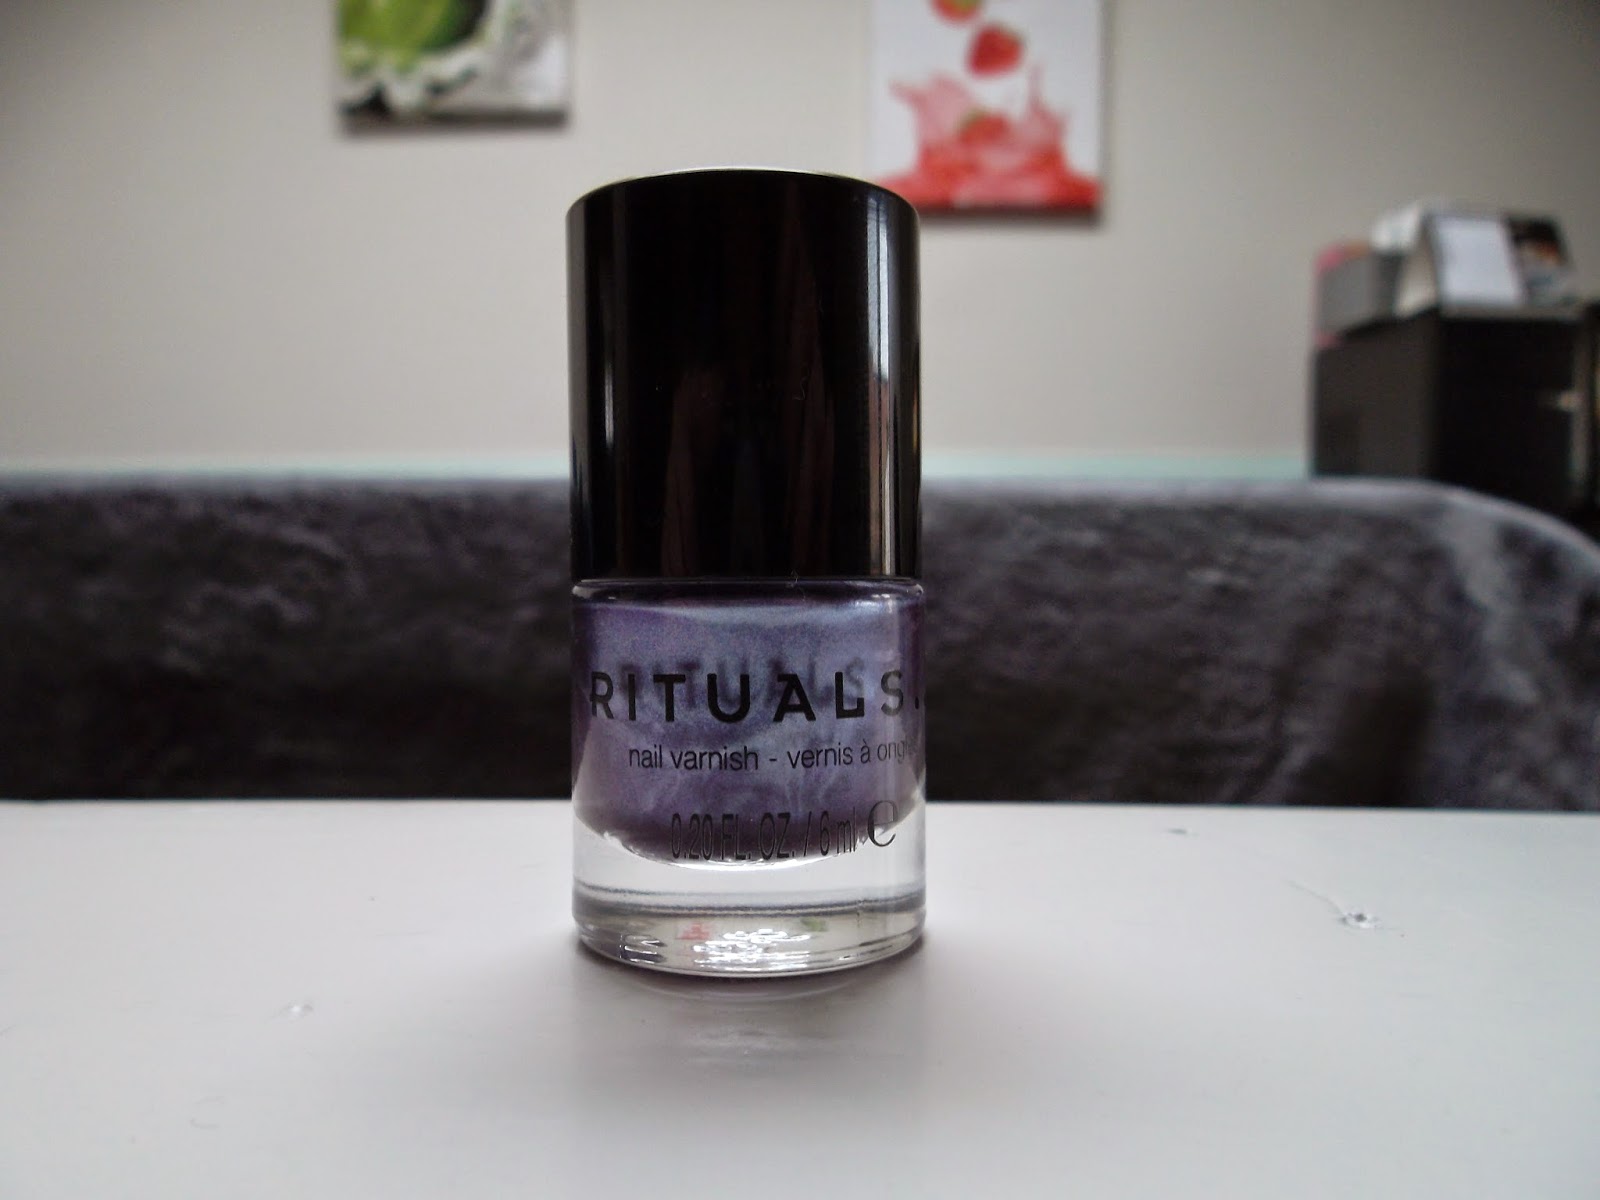 http://www.verodoesthis.be/2015/04/friday-nails-blueberry-purple.html